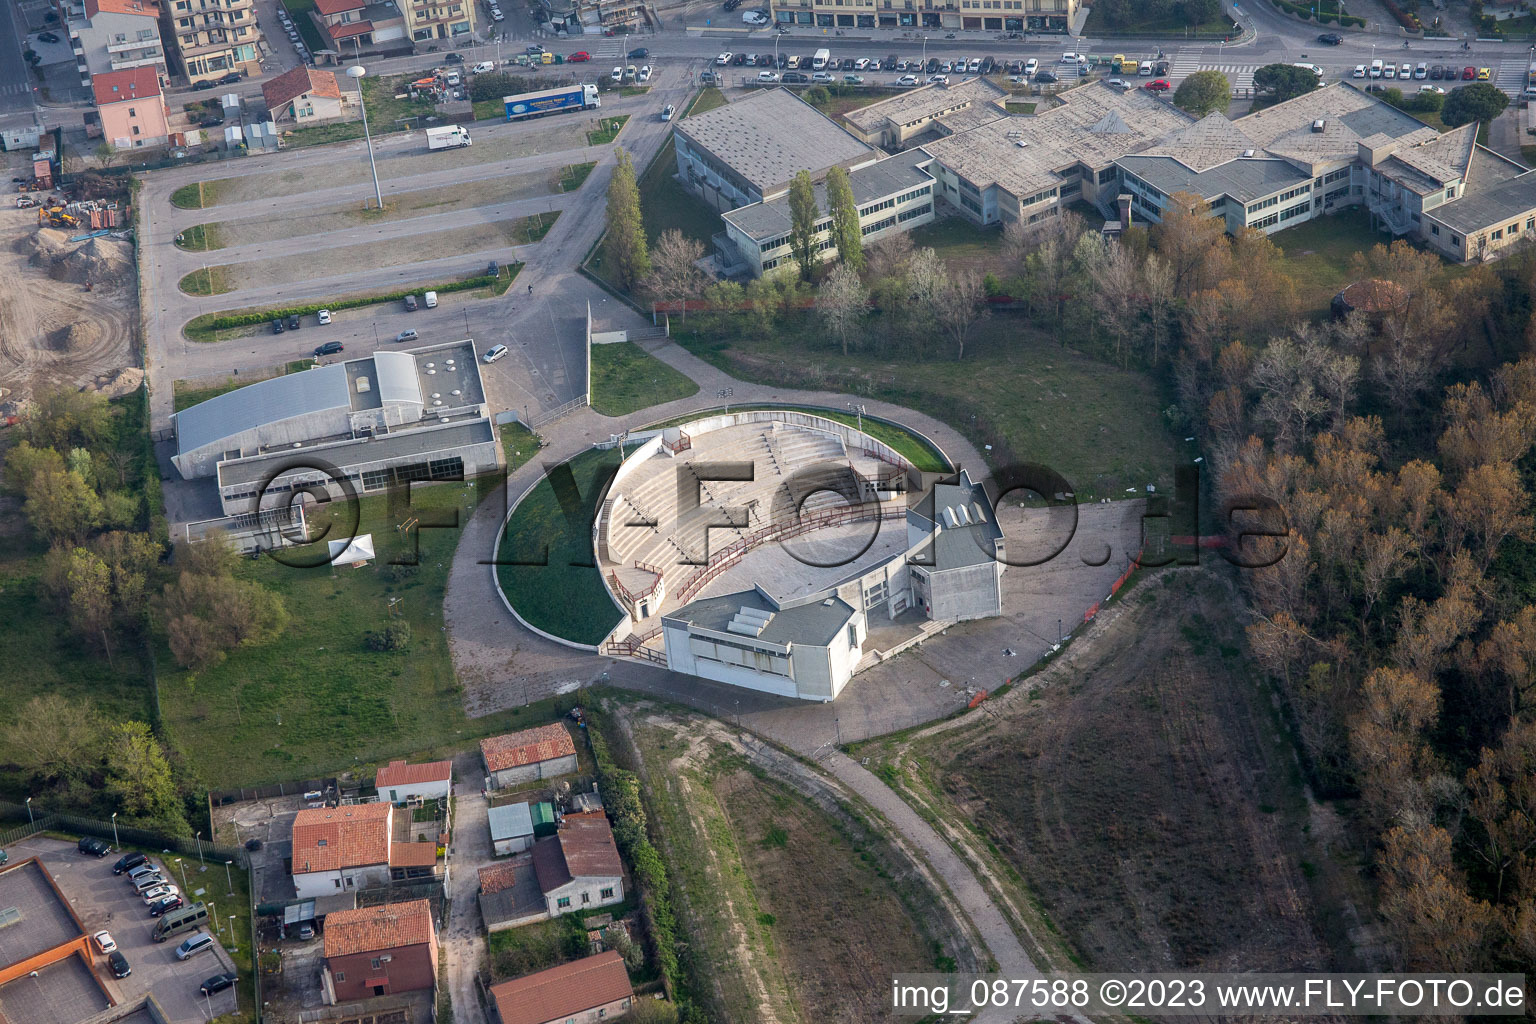 Sottomarina in the state Veneto, Italy from the drone perspective